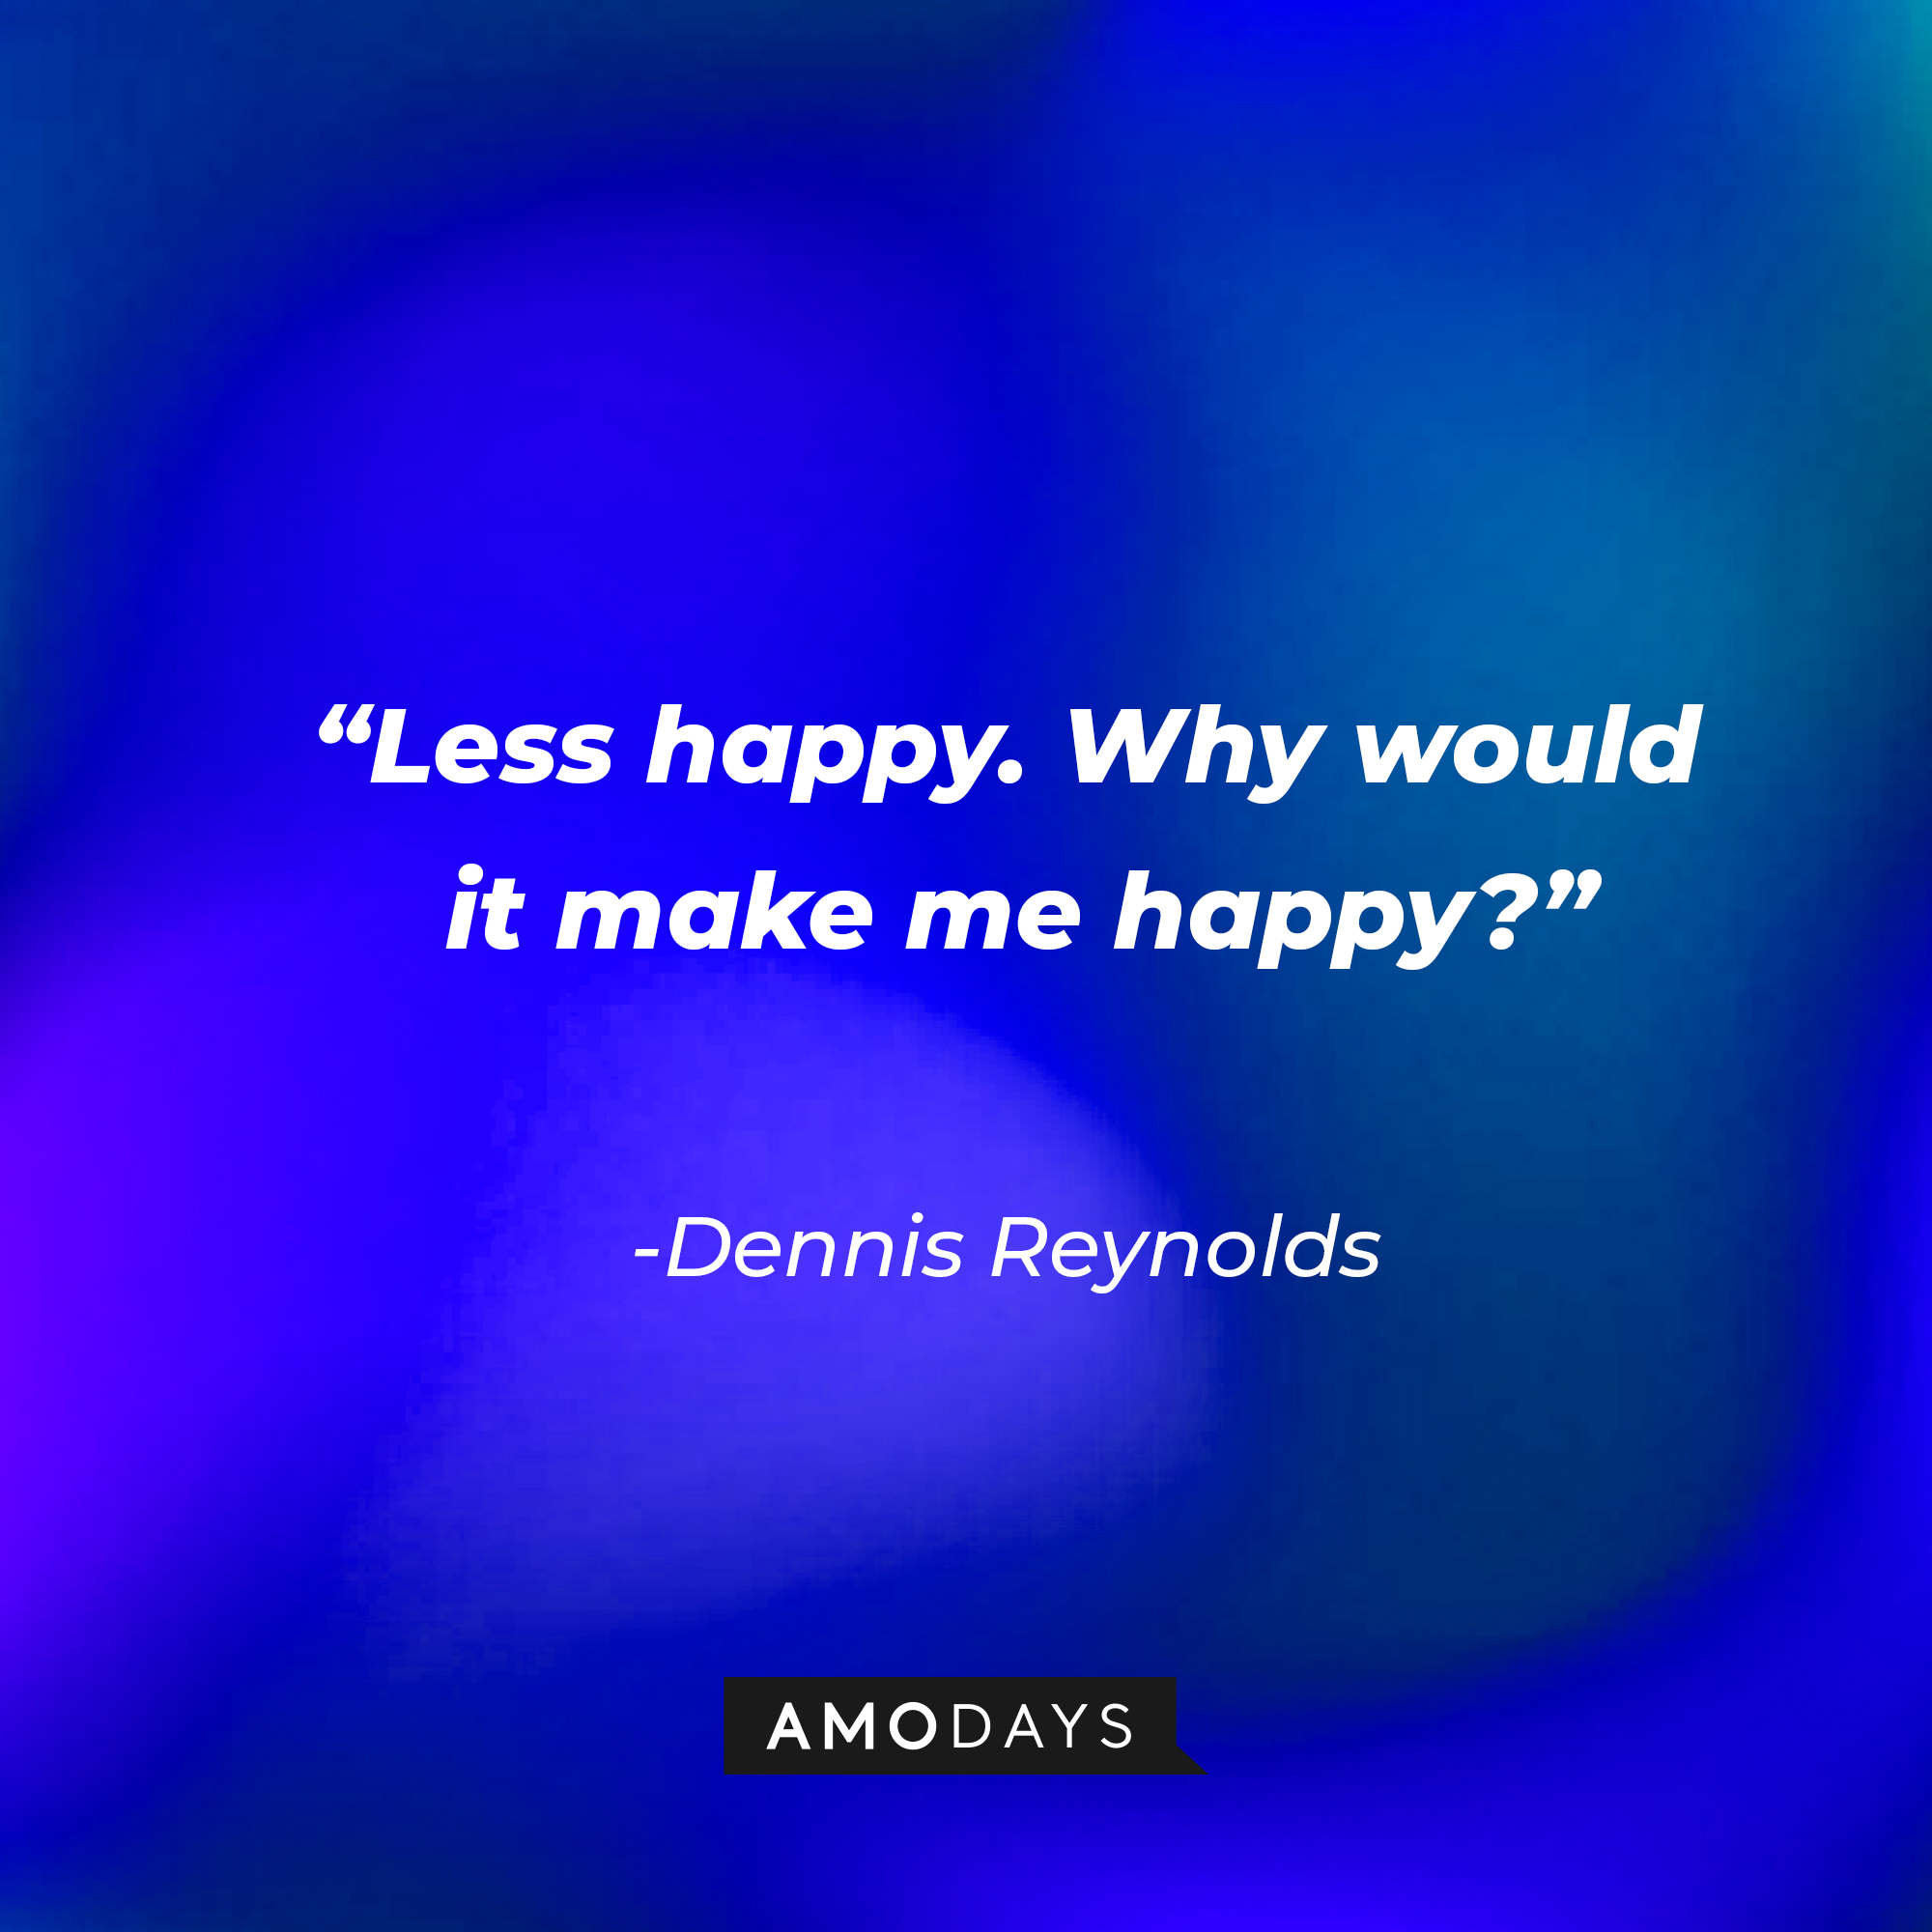 Dennis Reynolds’ quote:  “Less happy. Why would it make me happy?” | Source: AmoDays